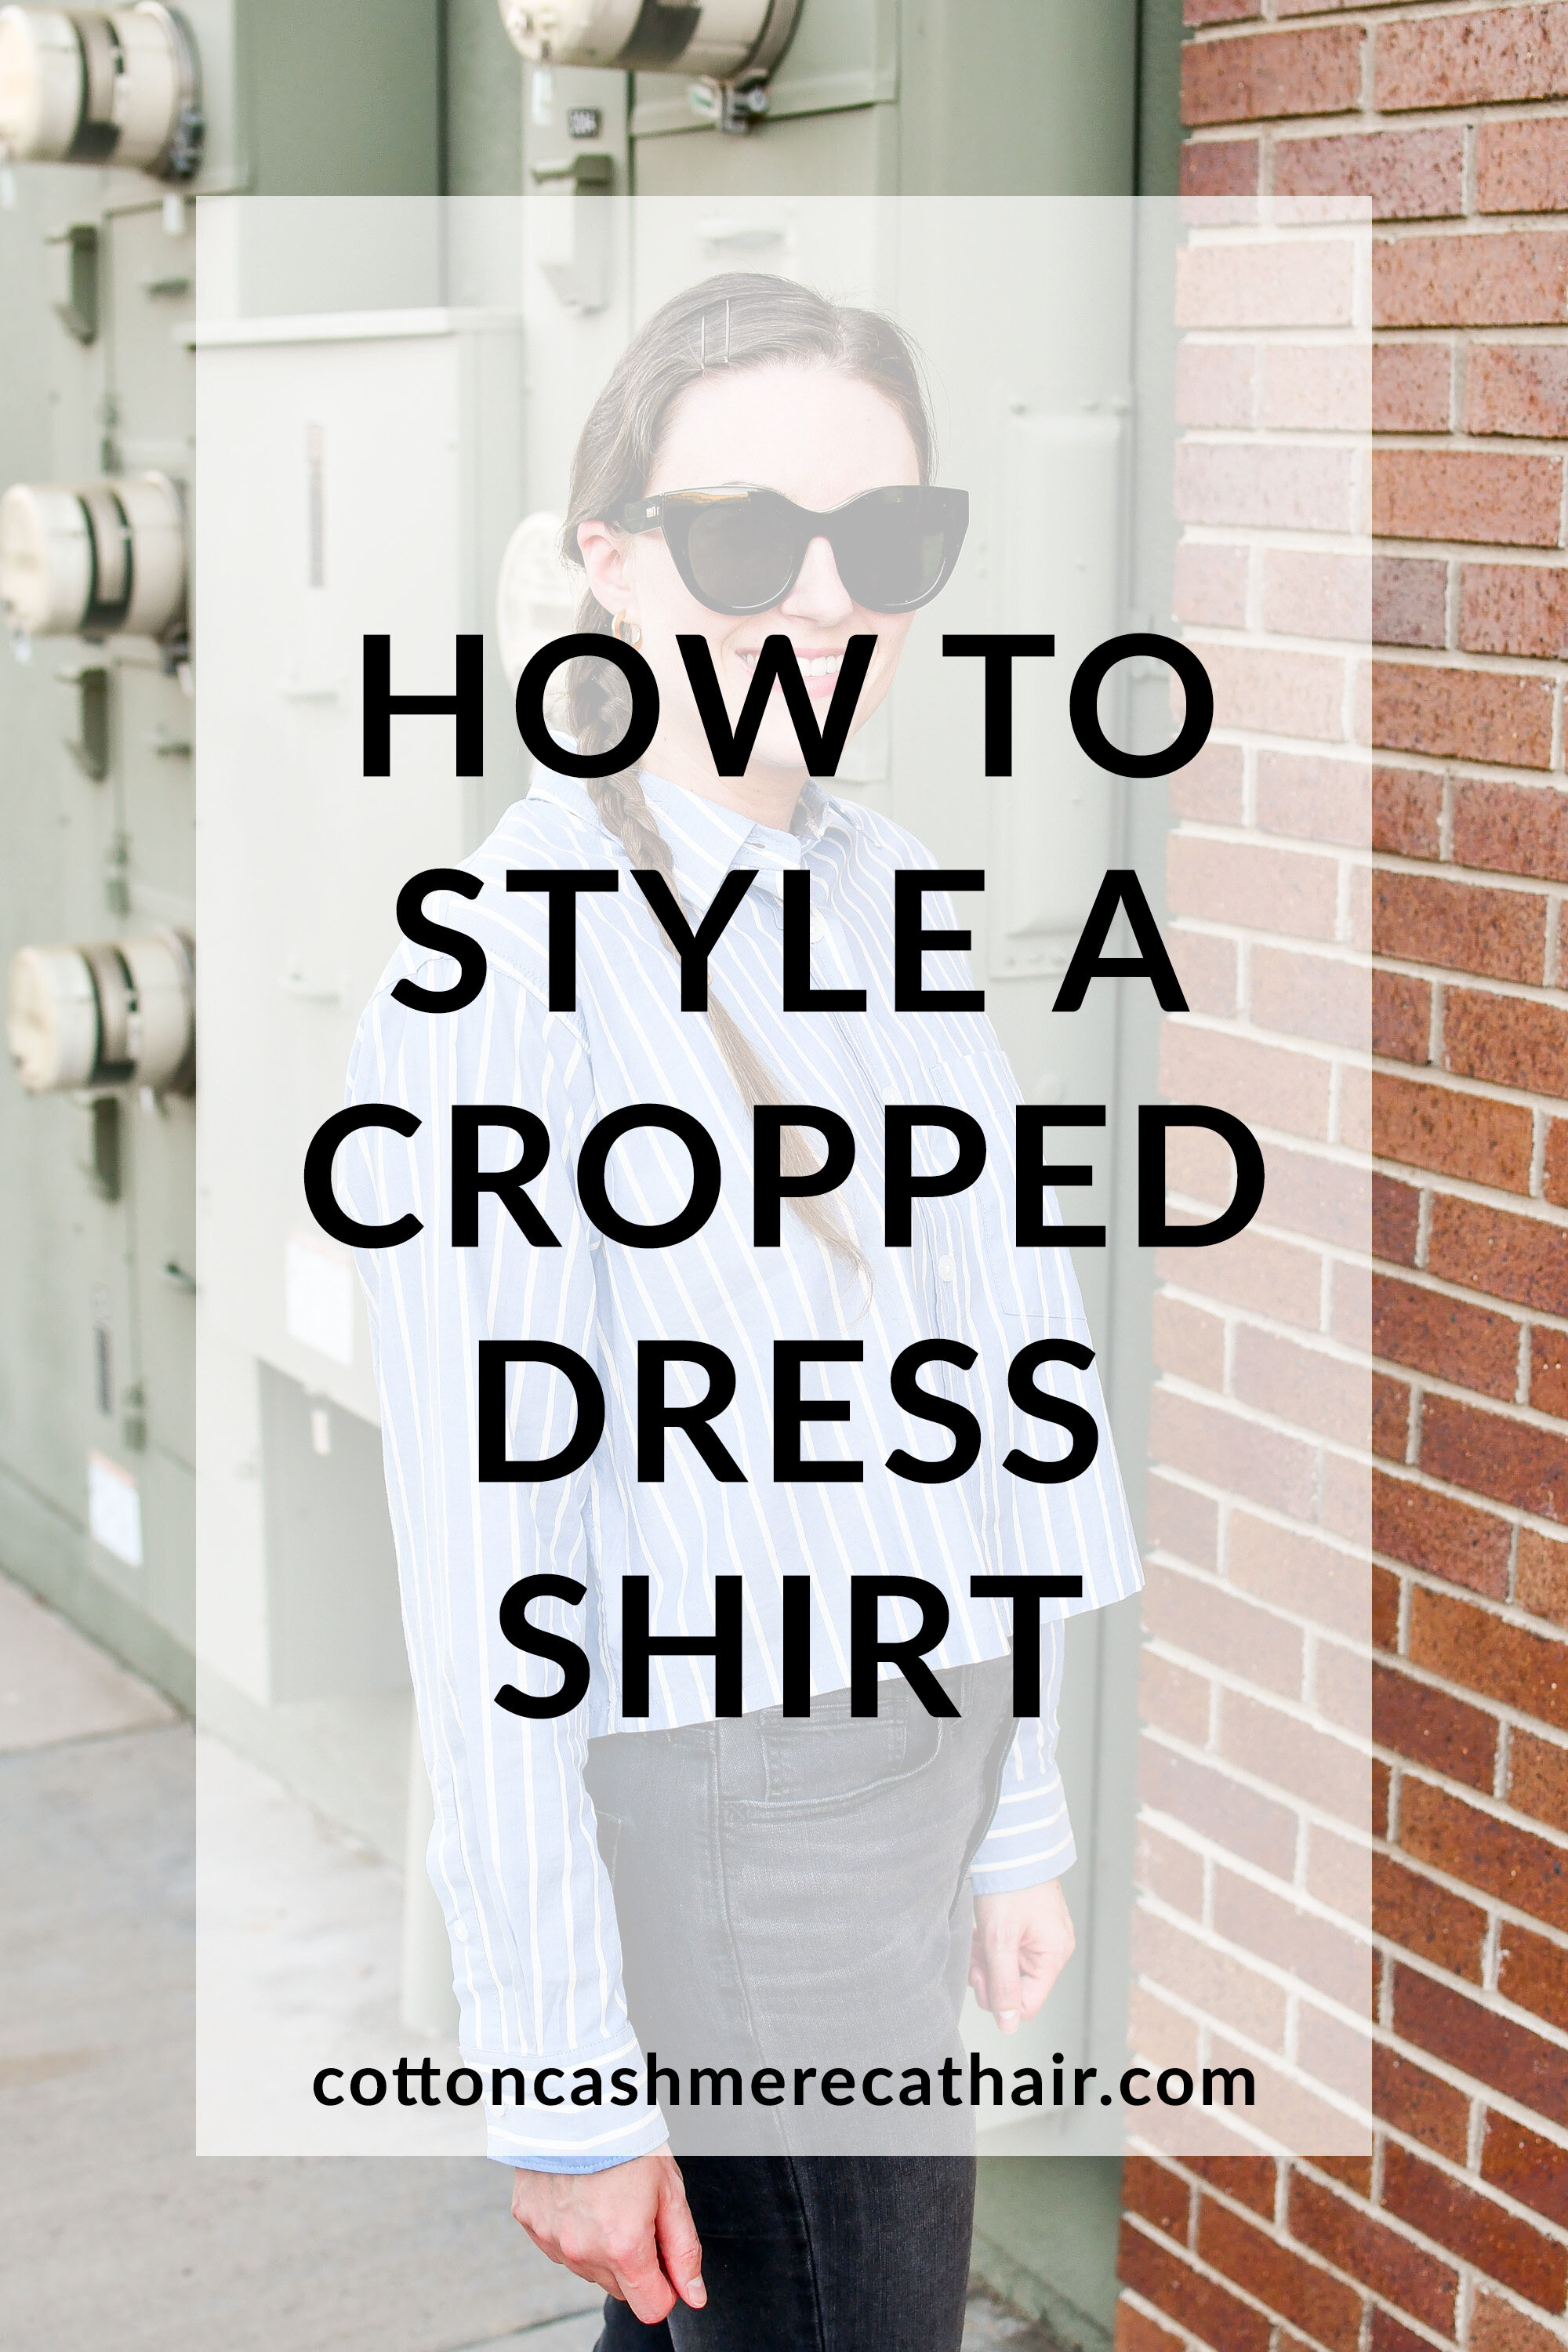 How to style a cropped dress shirt